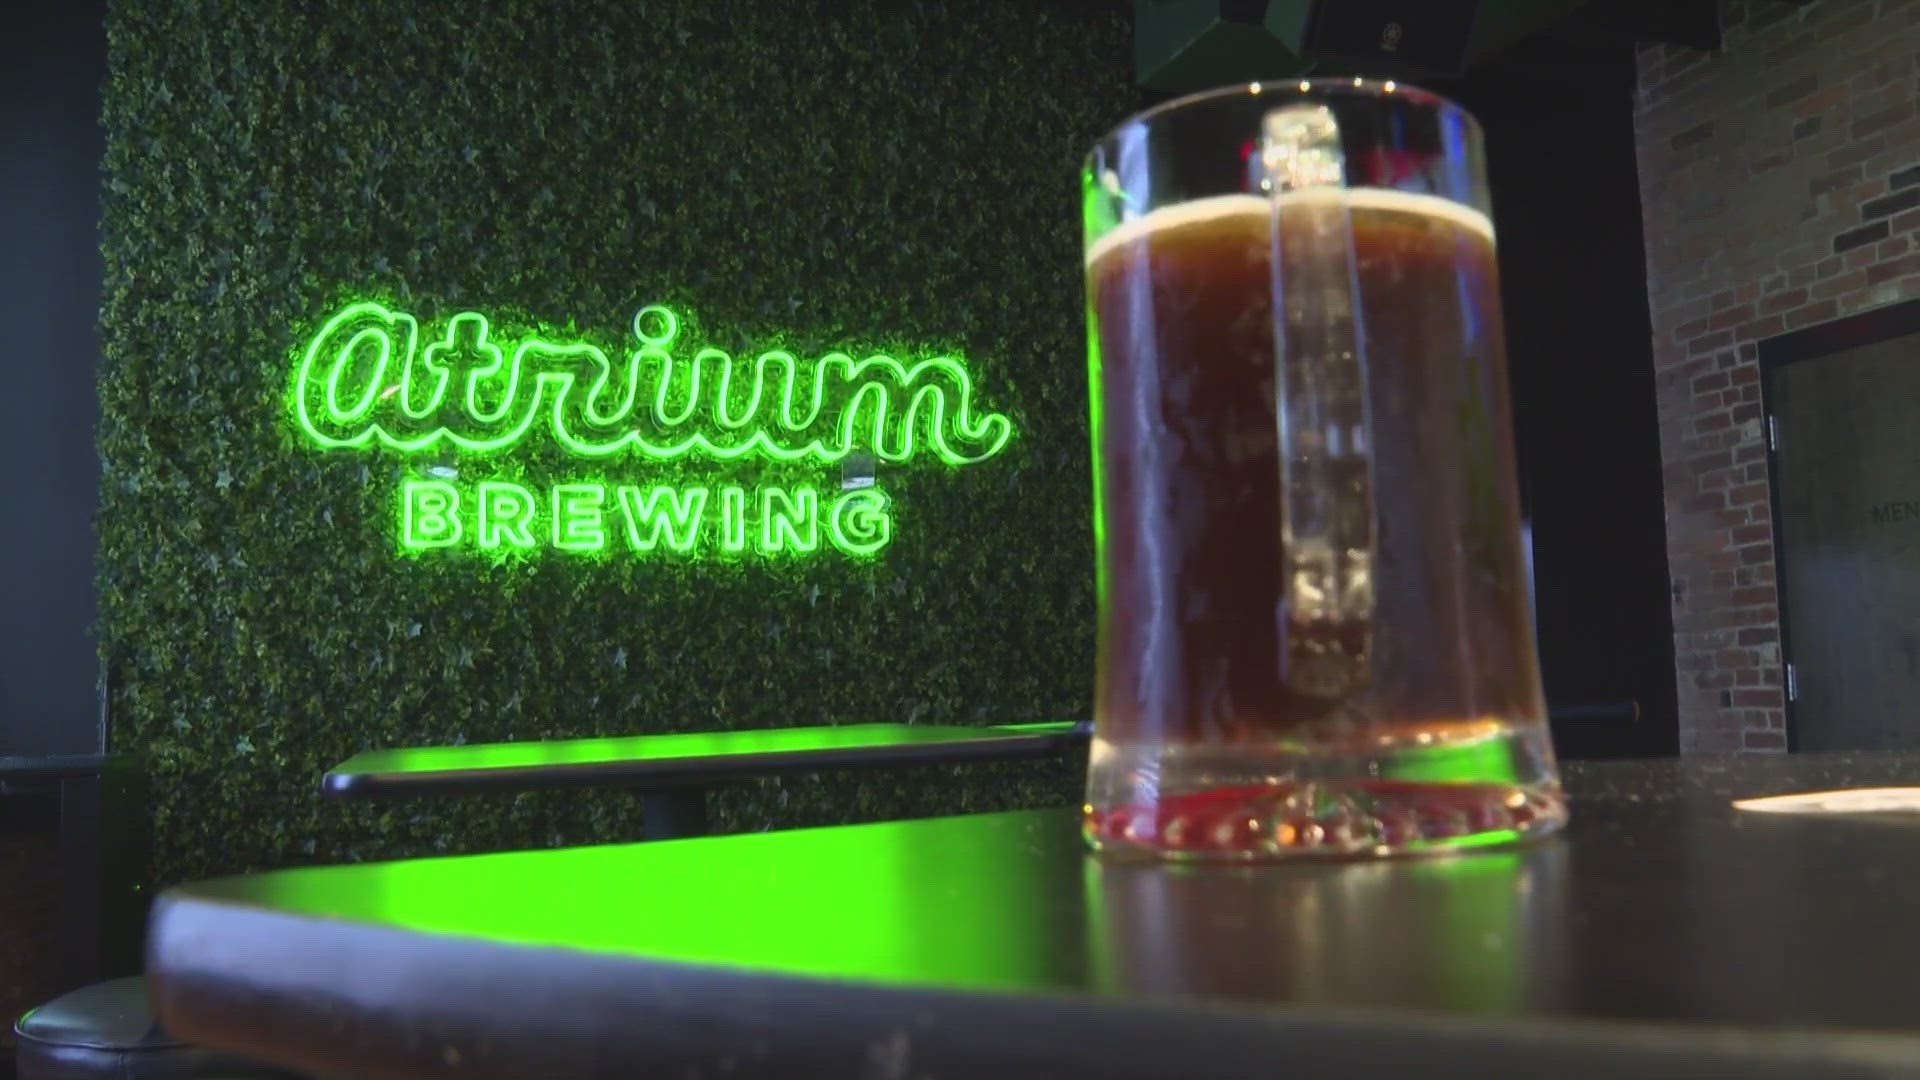 Atrium Brewing celebrated their third-year anniversary on Sept. 25 and now they're throwing the Oktoberfest party they;ve always wanted to.